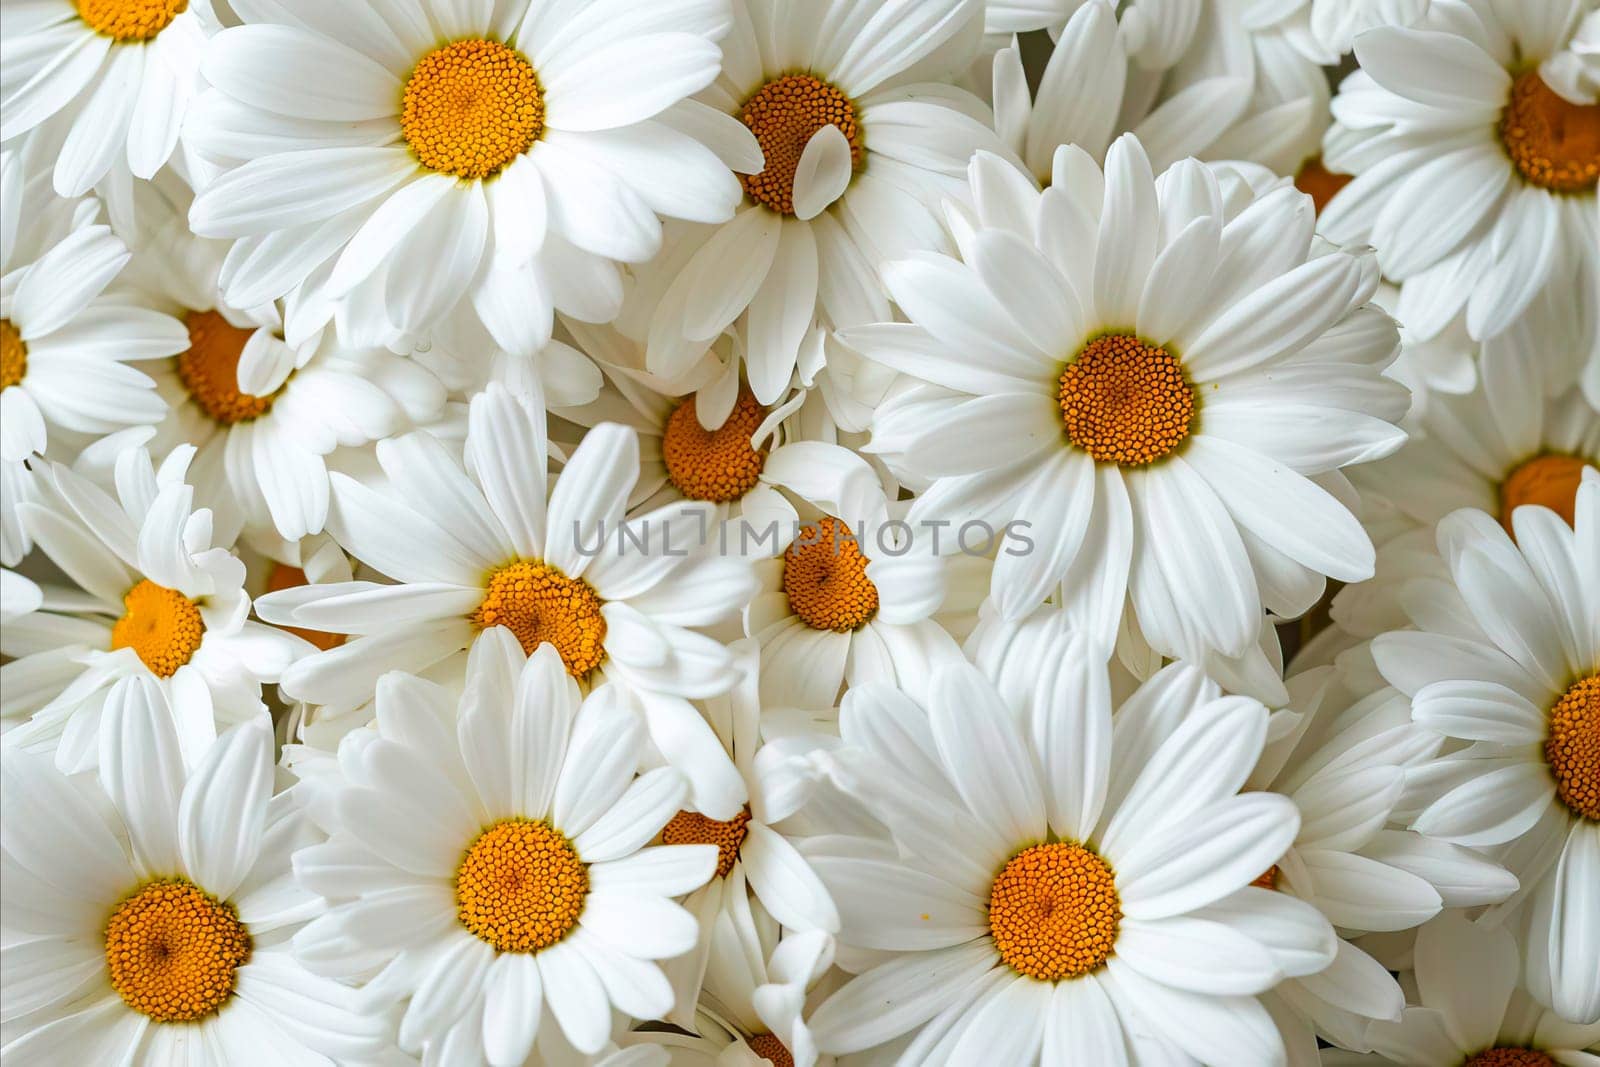 A bunch of white and yellow daisies by vladimka